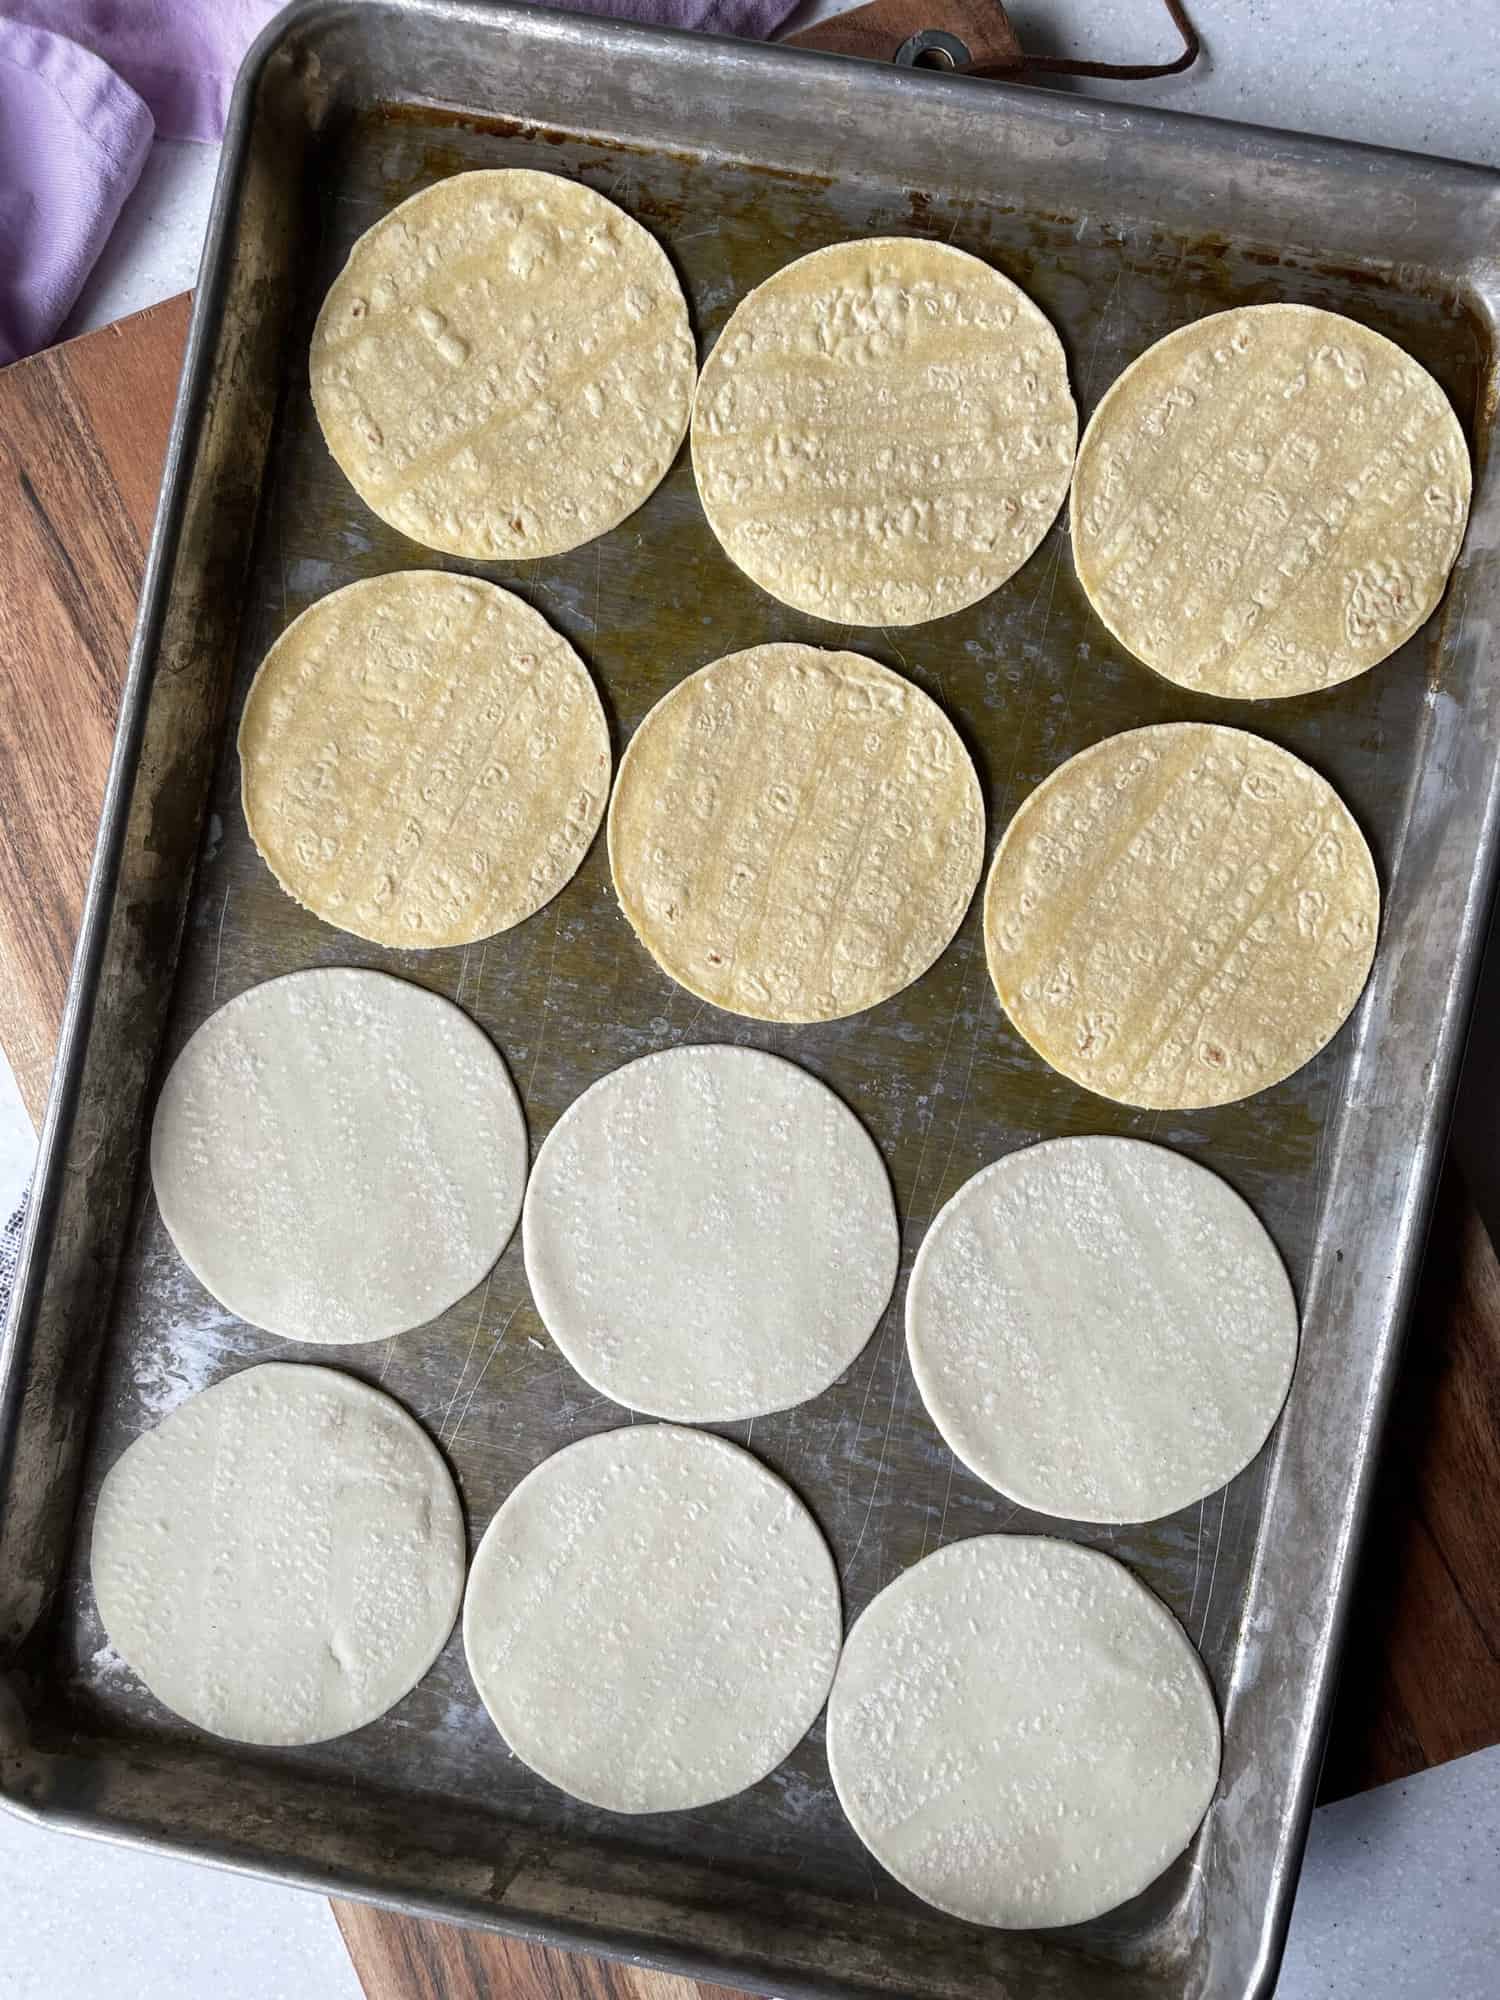 12 street taco corn tortillas spread out on baking sheet in since layer (six white and six yellow)